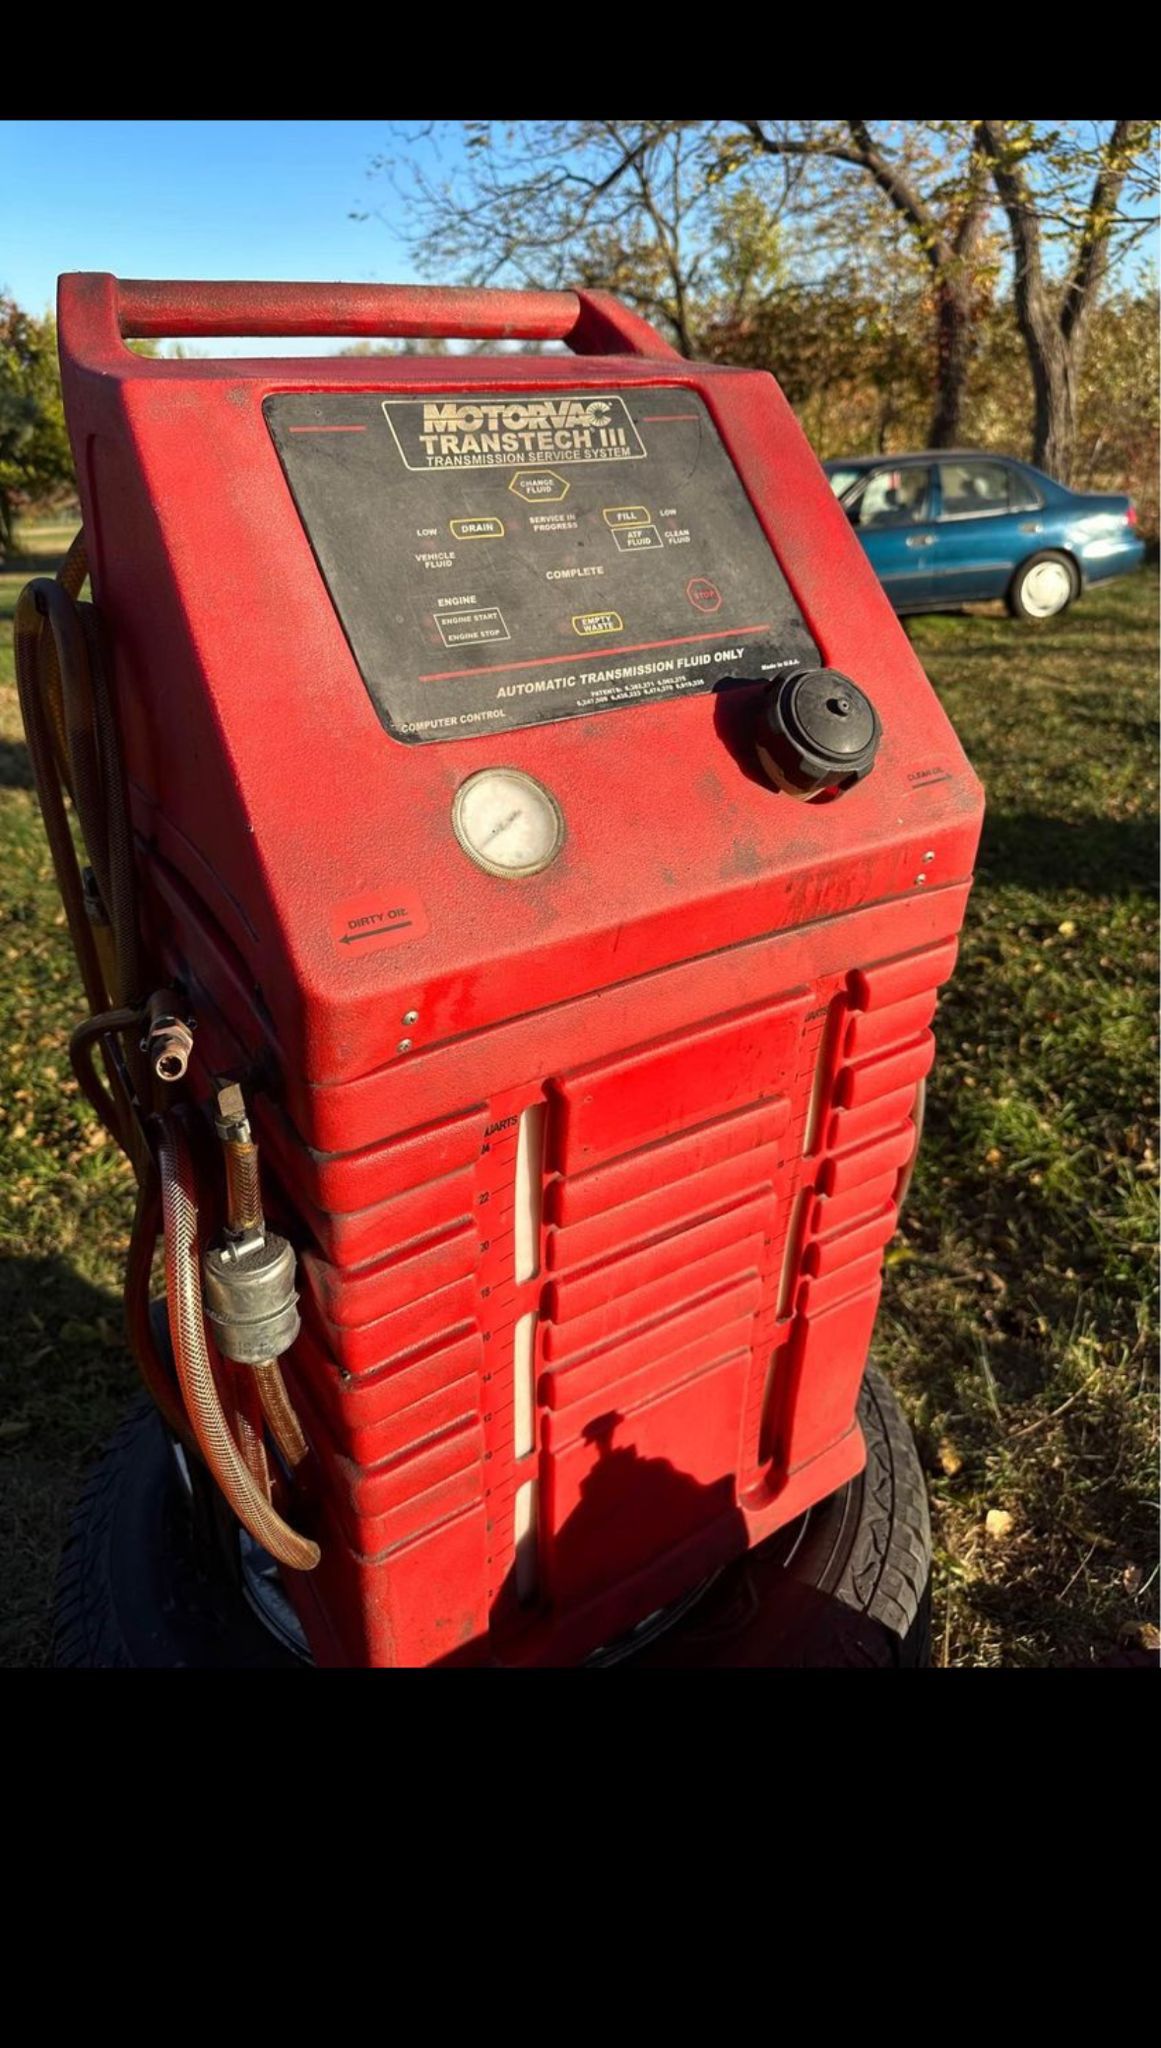 Transmission oil change machine in good condition